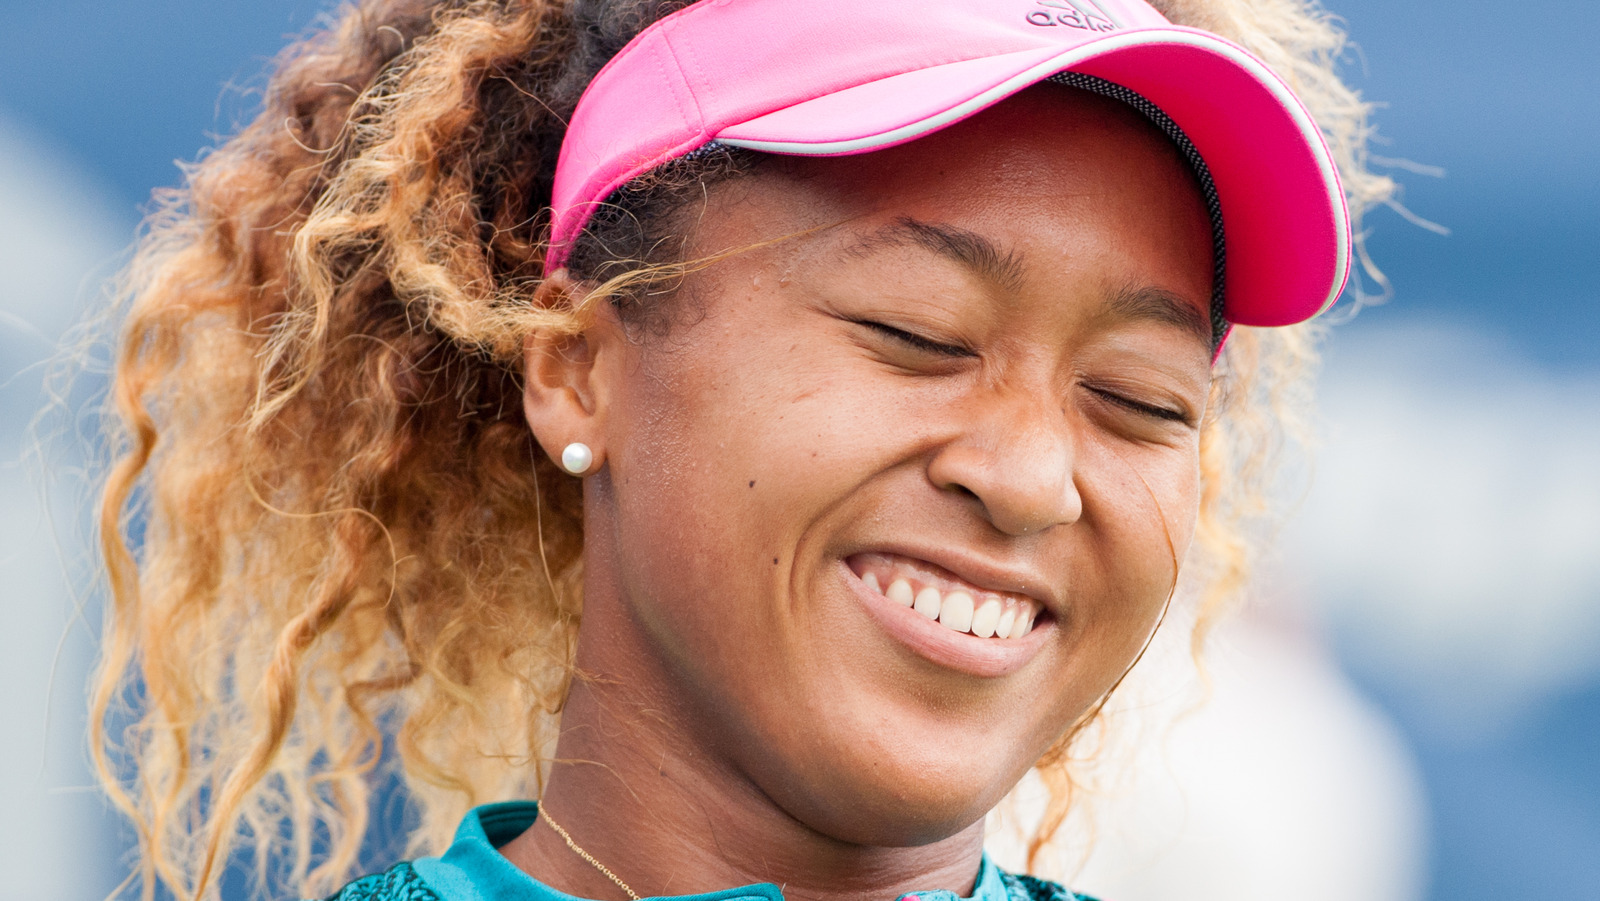 Naomi Osaka on Mental Health and Training to Face Her Idol at the